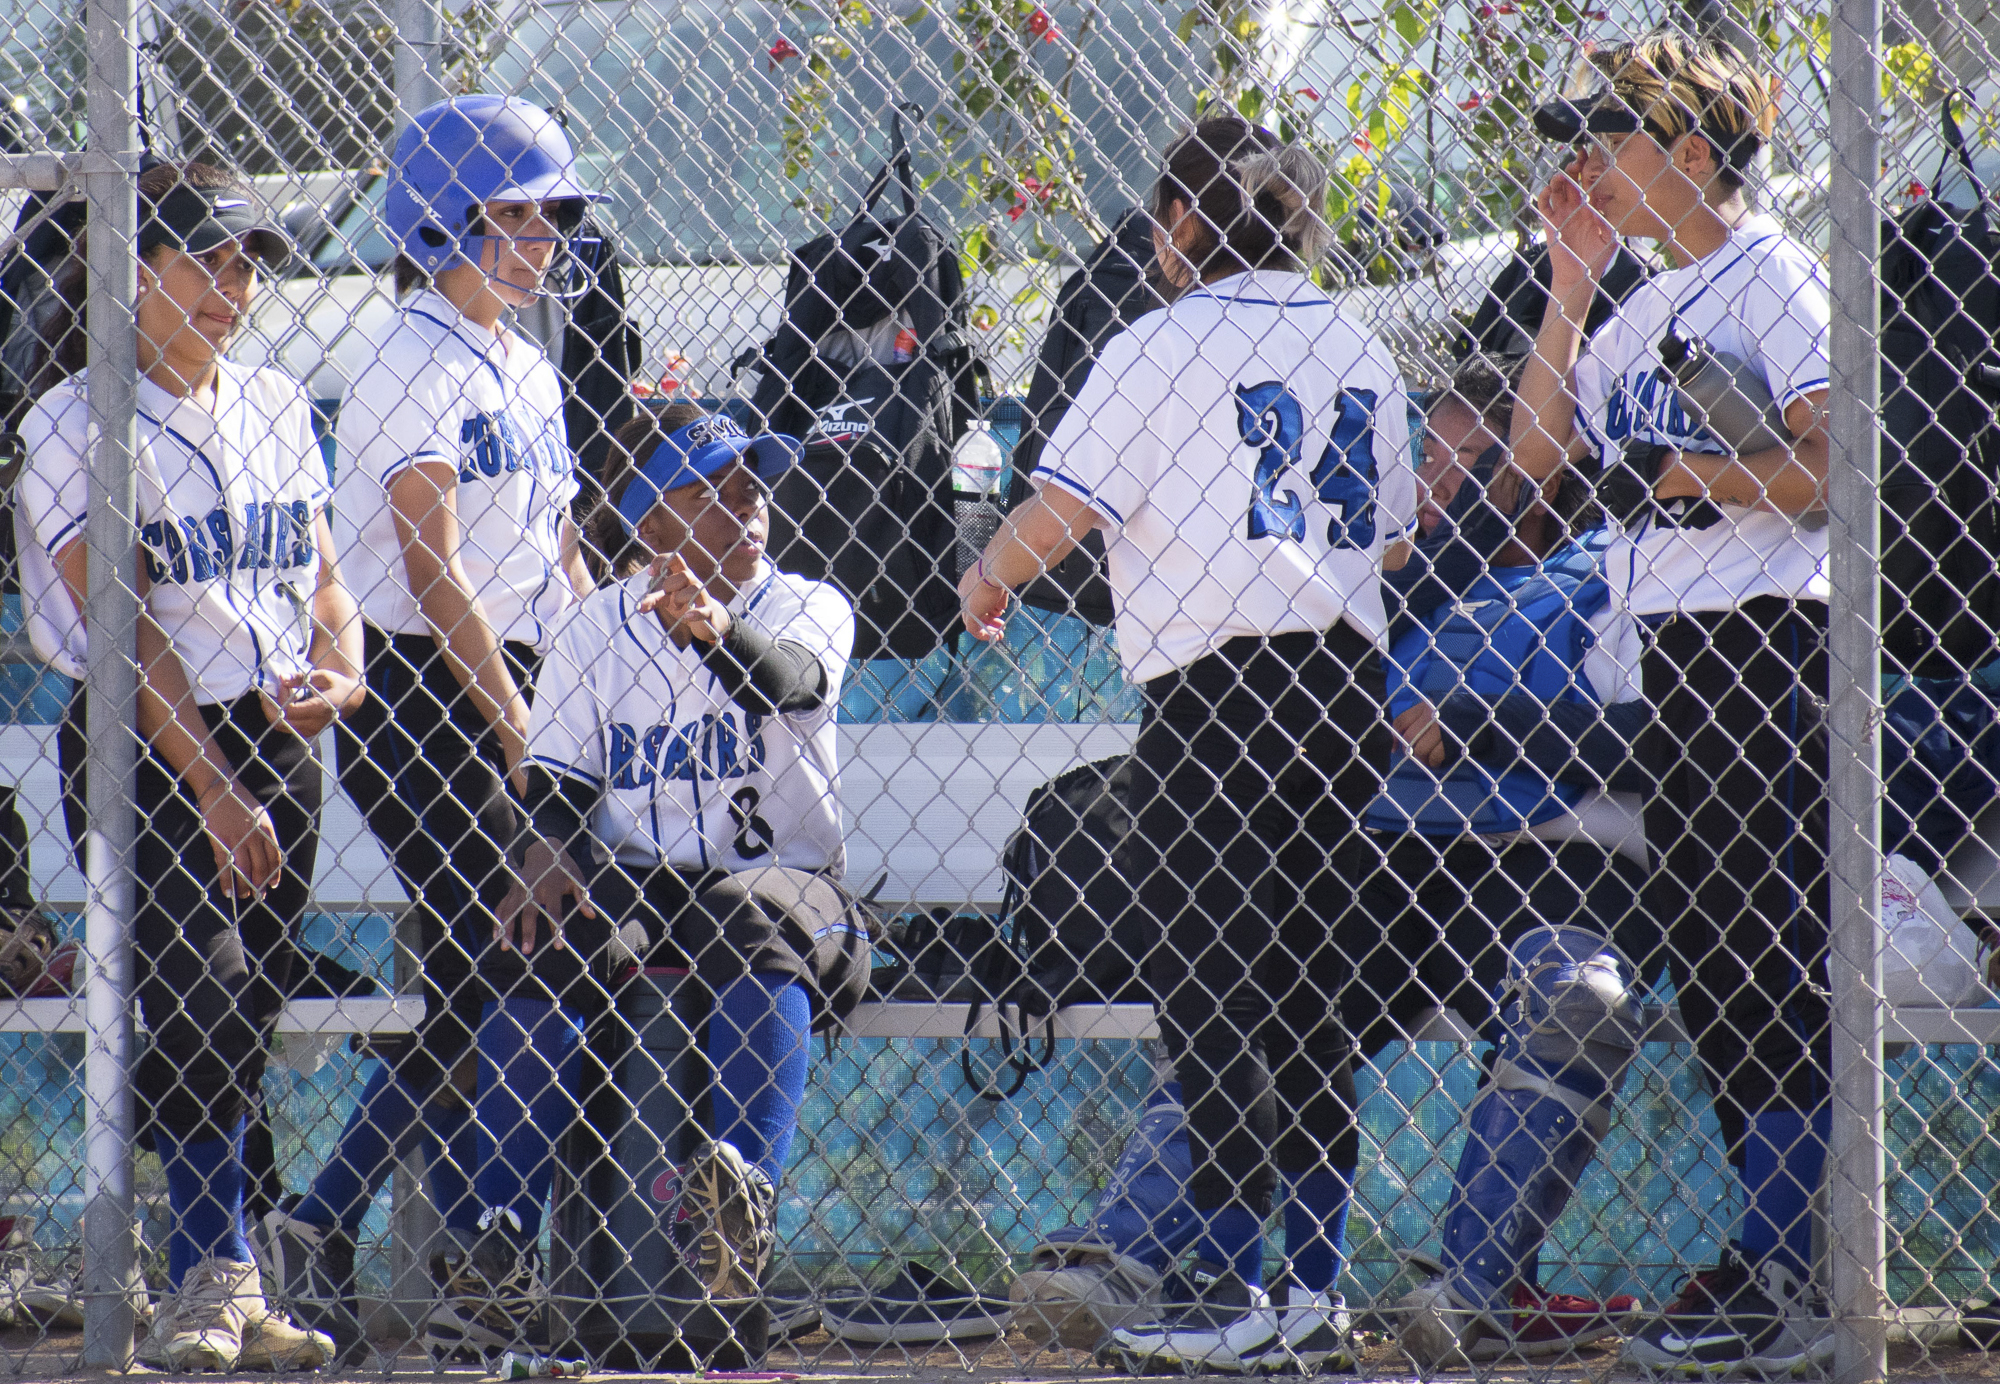  The Santa Monica Corsairs stop at the dugout during the sixth inning at a softball game on Tuesday, April 10 at the John Adams Middle School Field in Santa Monica, California. The game ended with an 11-8 loss for the Corsairs, further continuing the